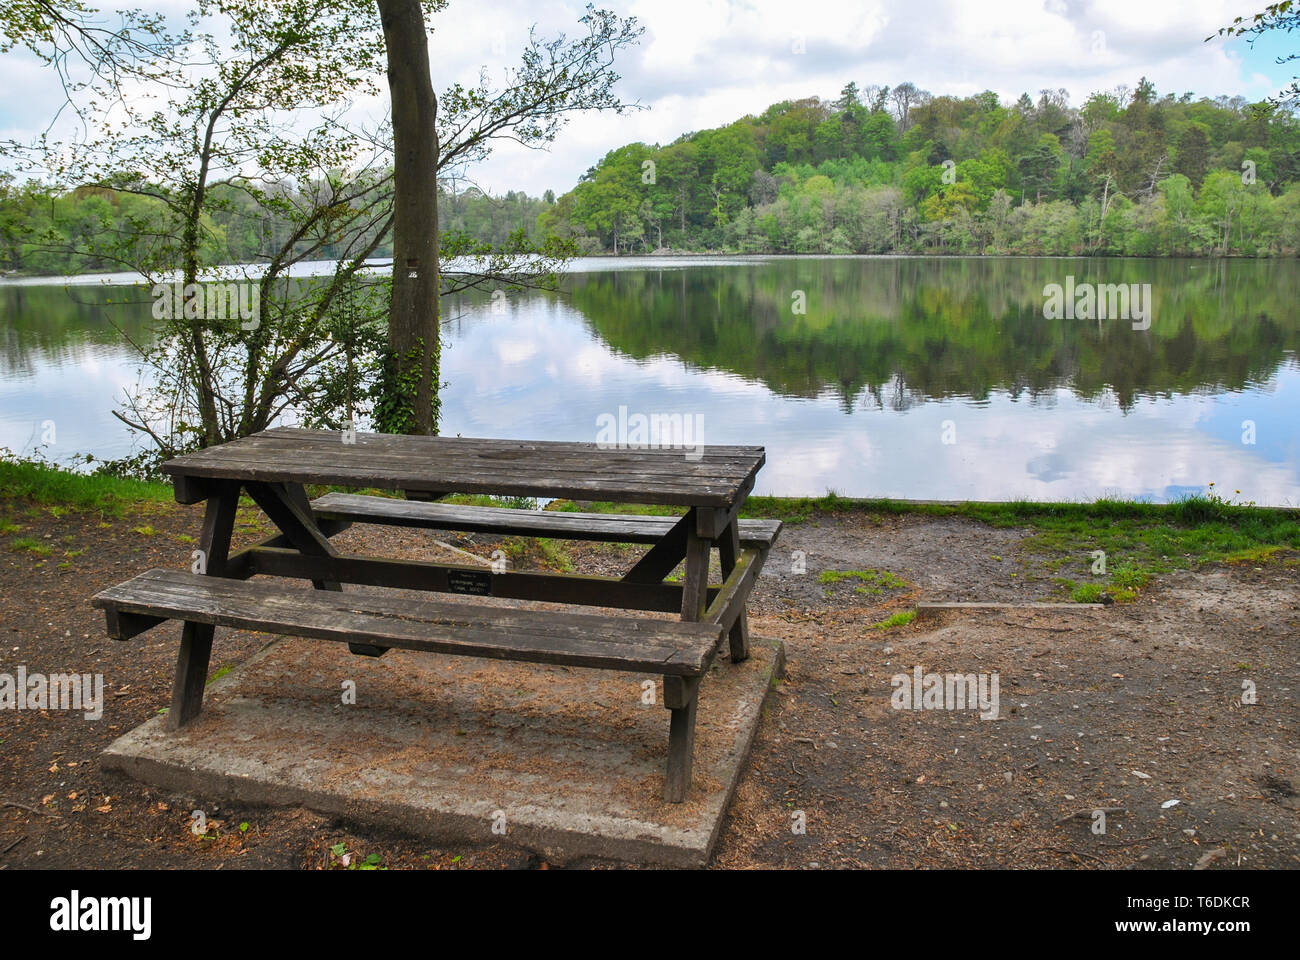 A picnic bench situated at the side of a beautiful lake in the English countryside Stock Photo